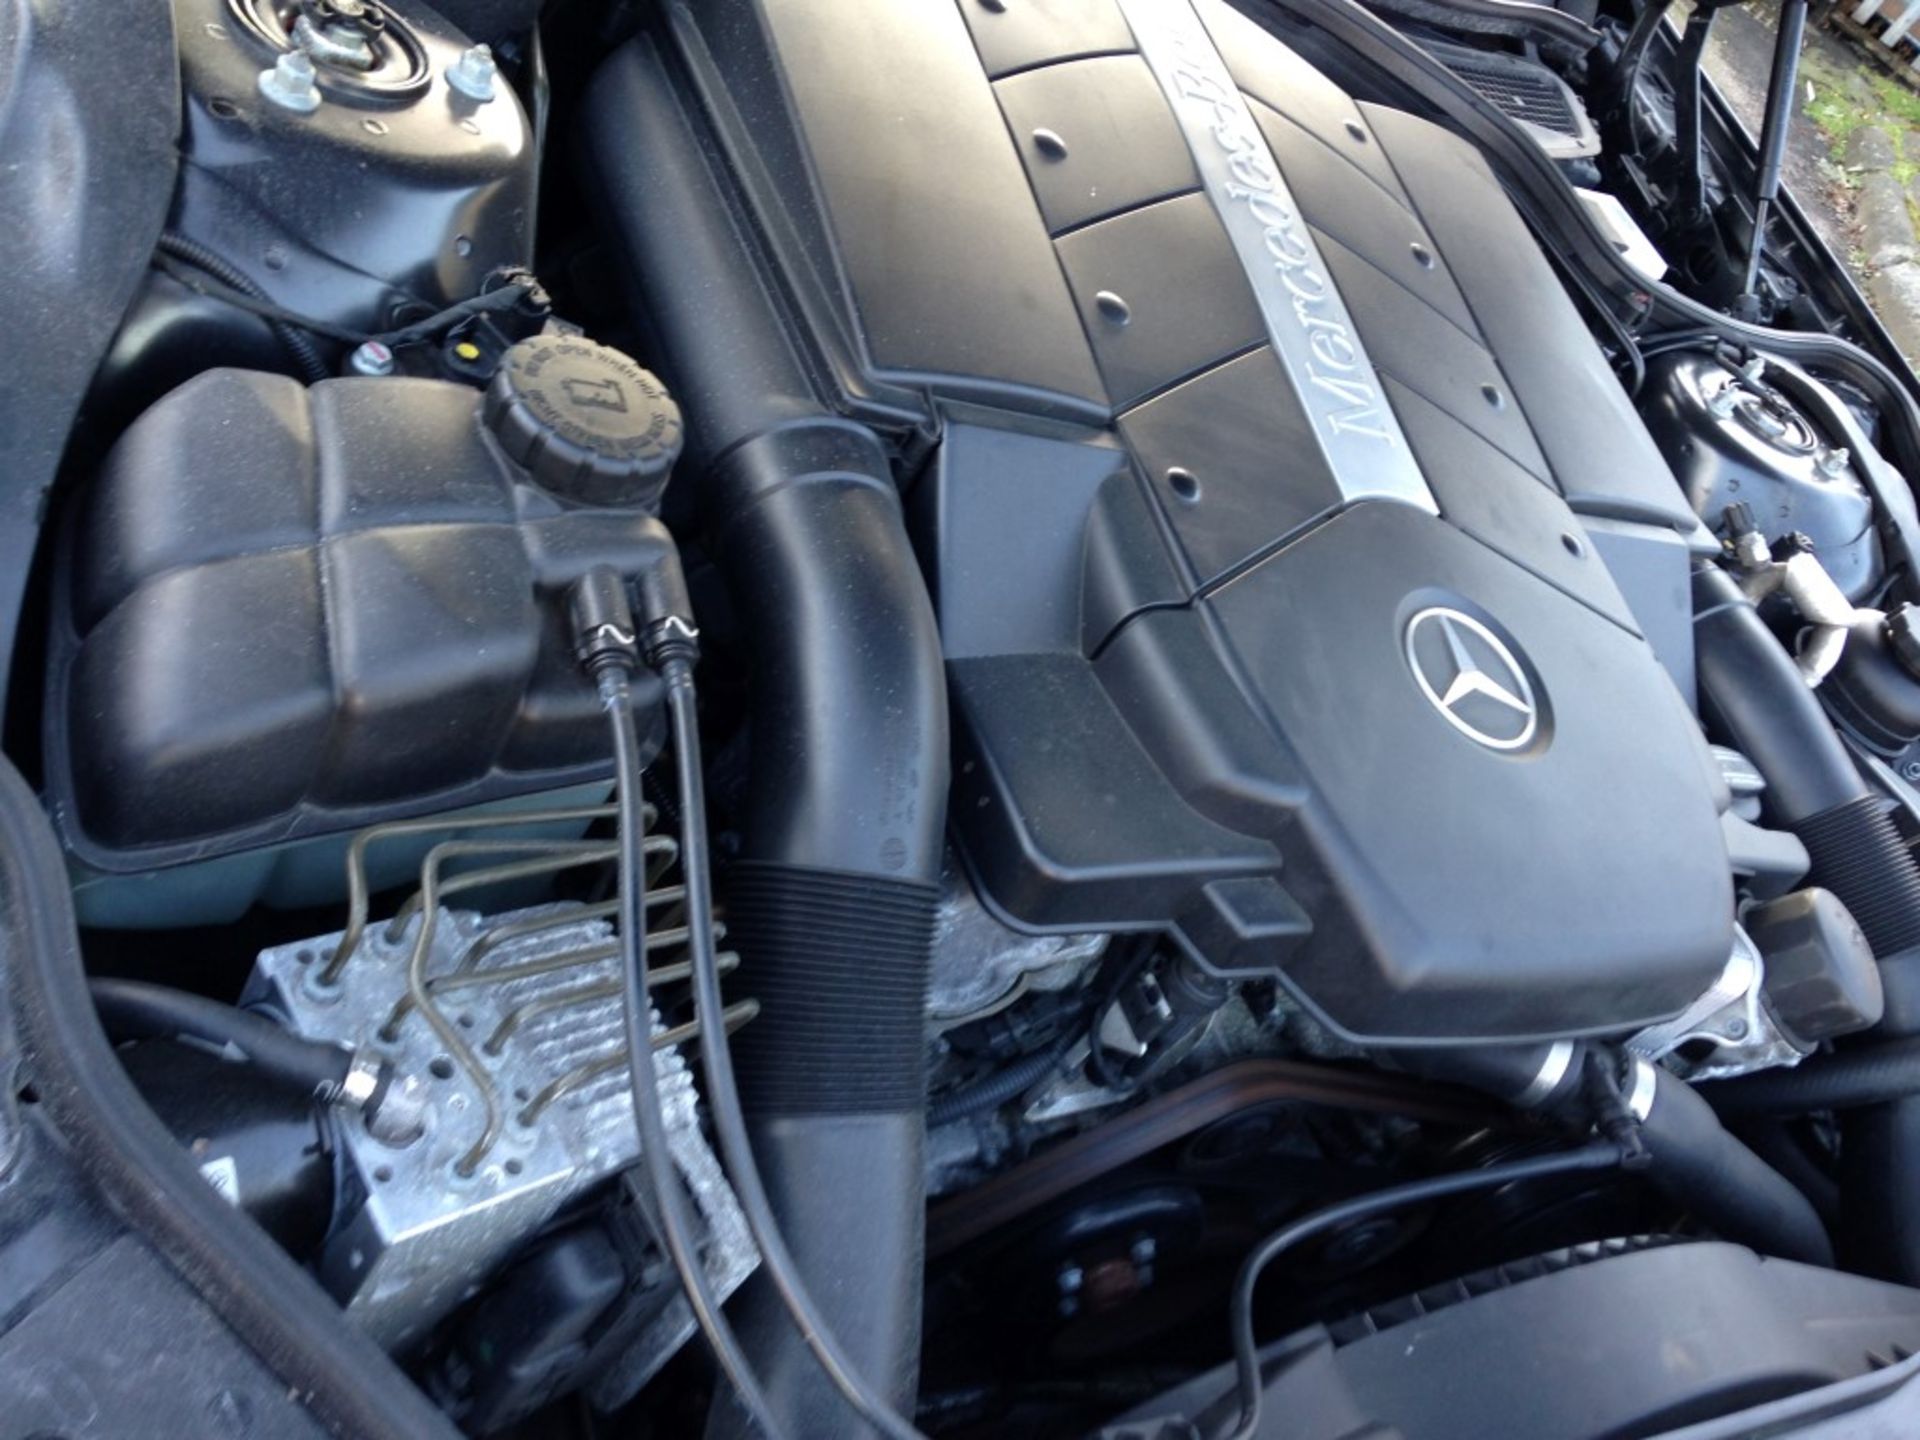 1 x Mercedes SL500 Automatic 5.0 Convertible - Petrol - Year 2002 - 94,500 Miles - Long MOT Expiry - Image 8 of 31